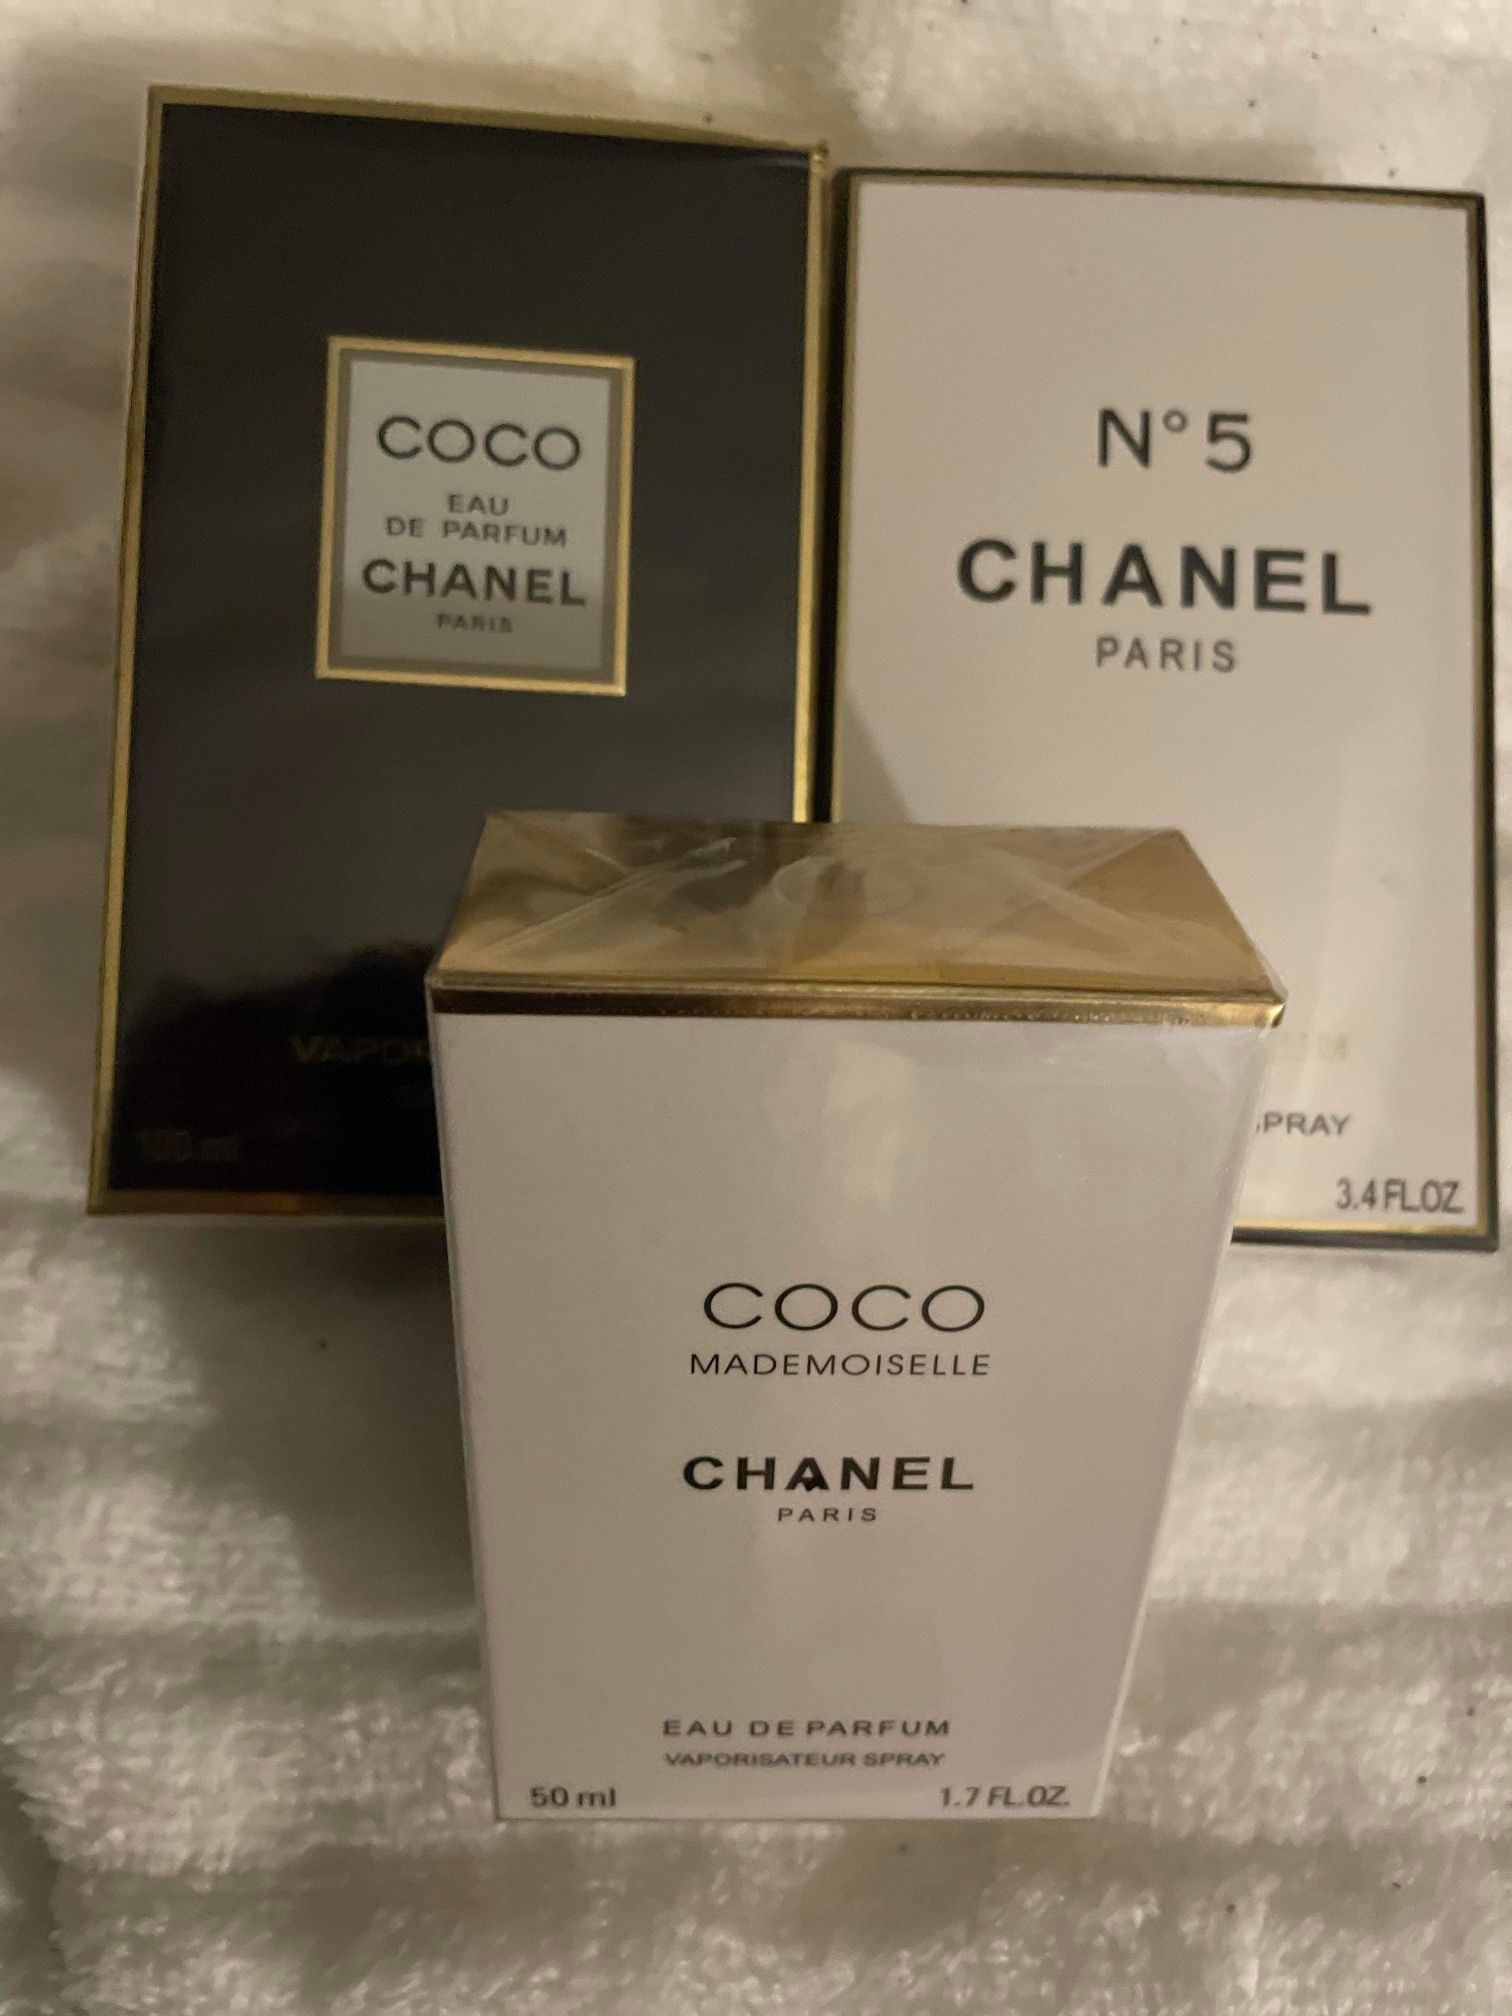 The Glorious Chanels .... Chanel #5, Coco Paris Or Coco Mademoiselle ... Your Choice .... $85 EACH AUTHENTIC ... Only 1 Per Customer 